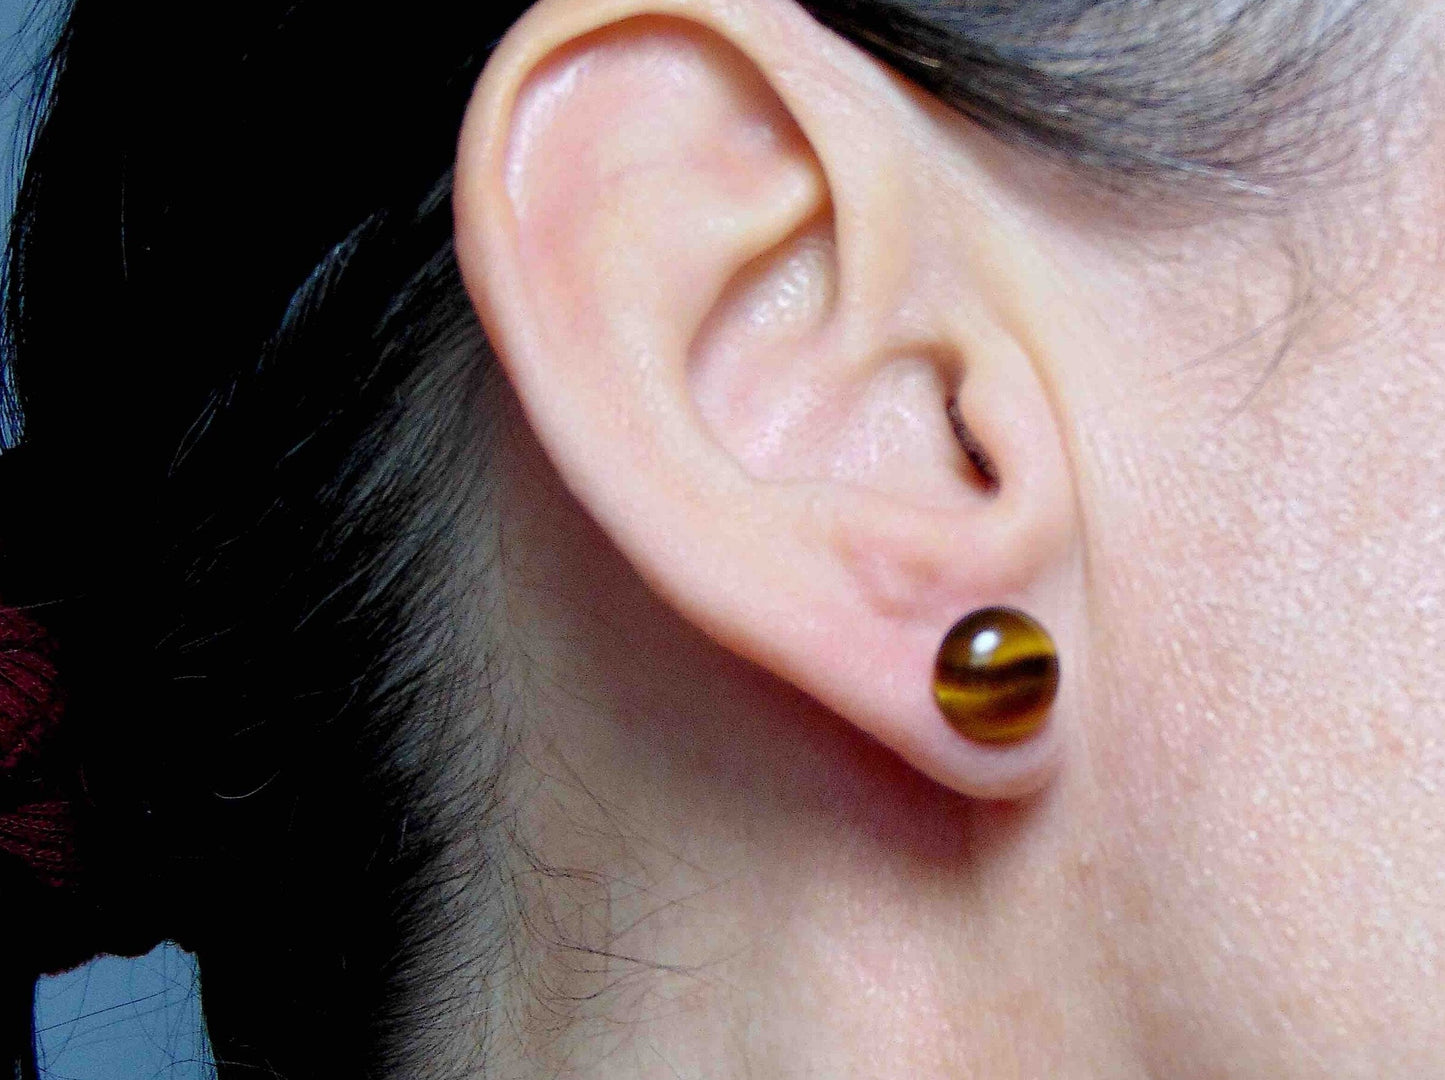 Ear studs with 10mm round golden tiger eye stone cabochons, stainless steel posts